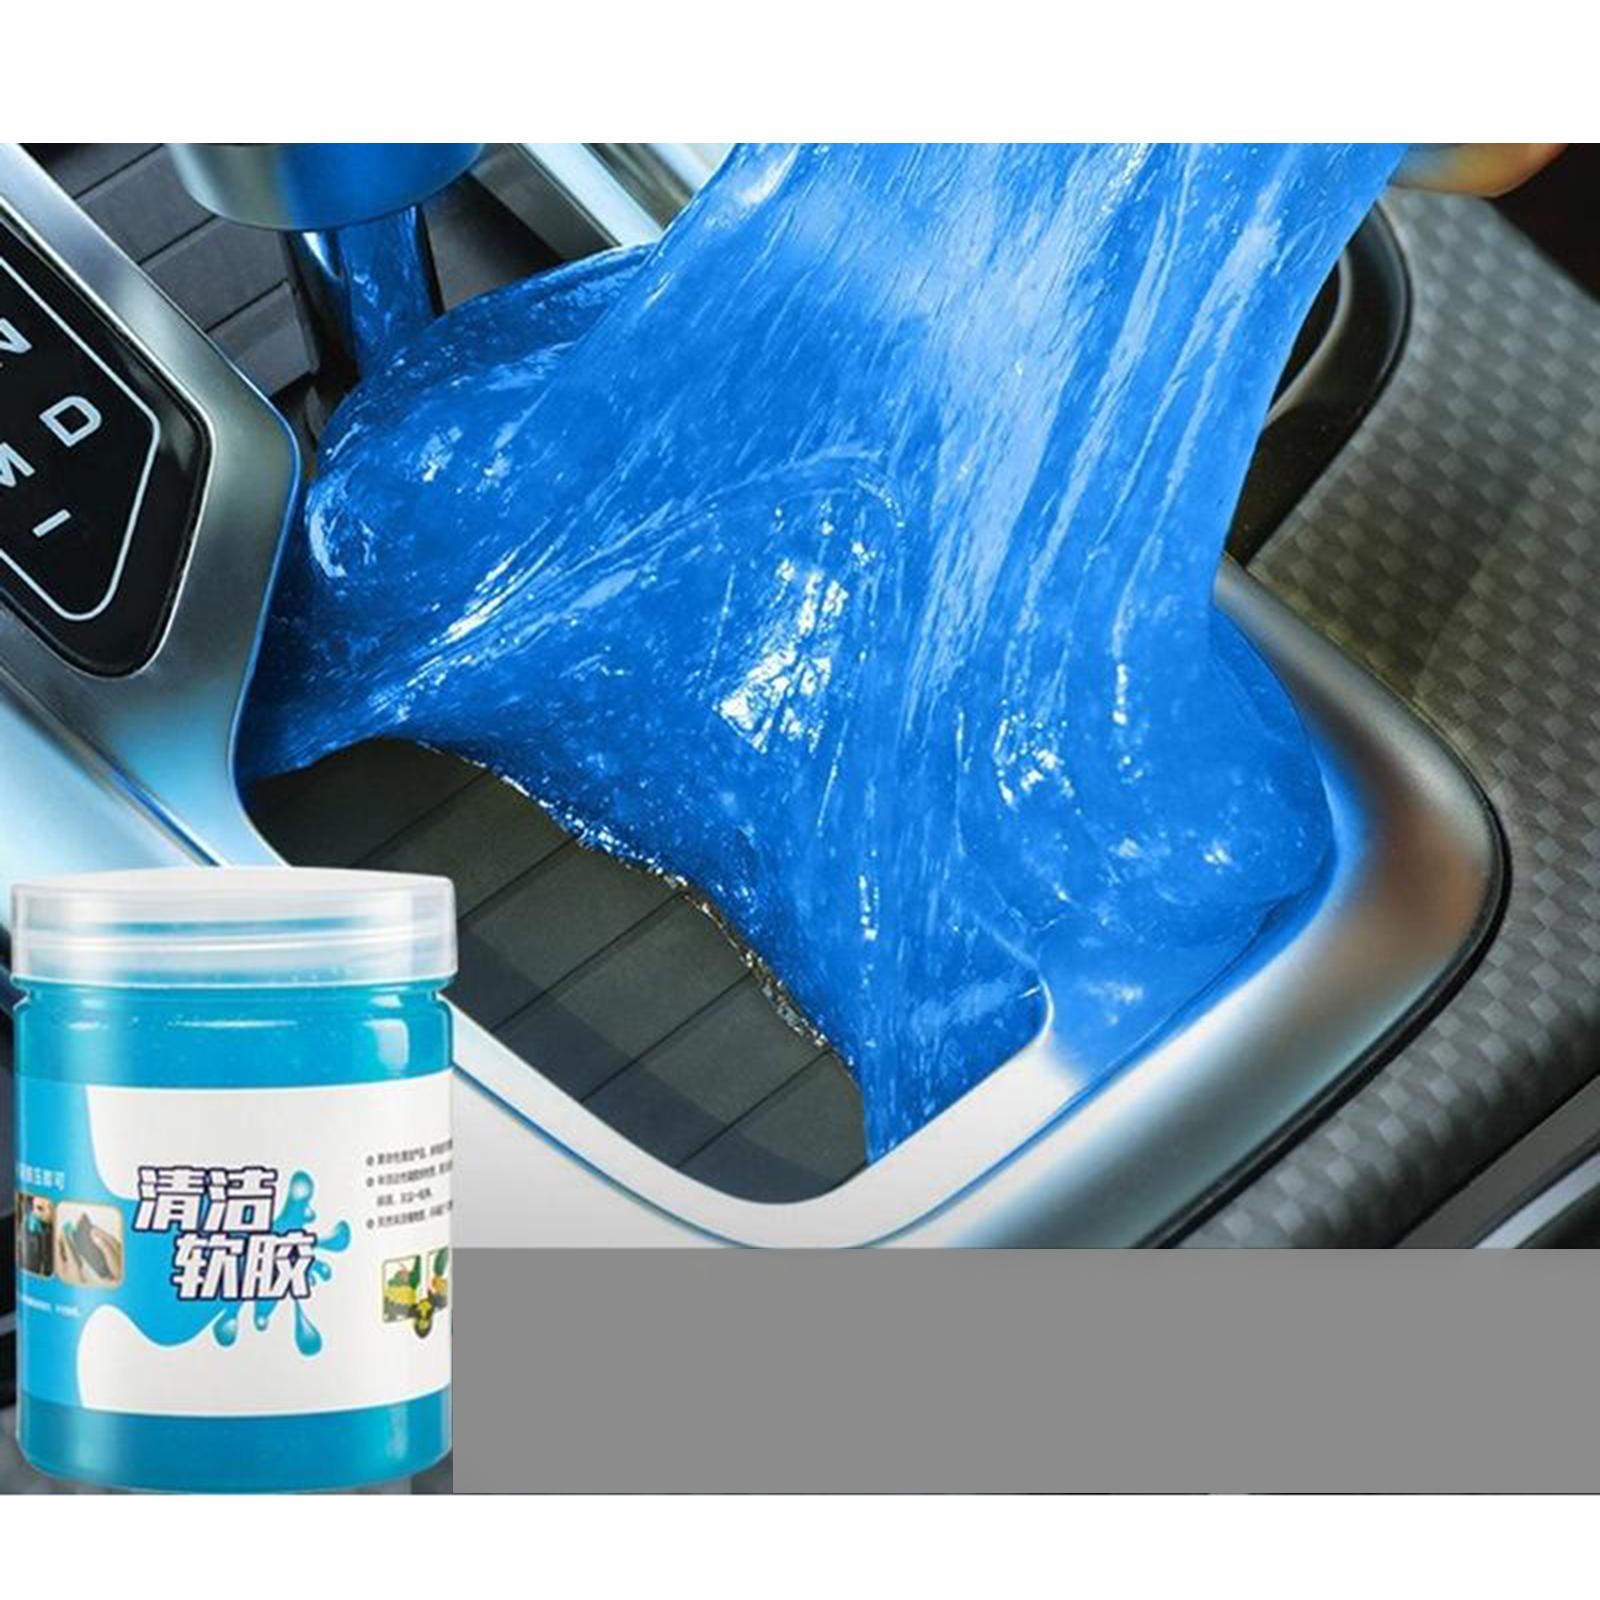 Slime Cleaning Gel Cleaner Car Computer Laptop Keyboard Dust Cleaning  160g